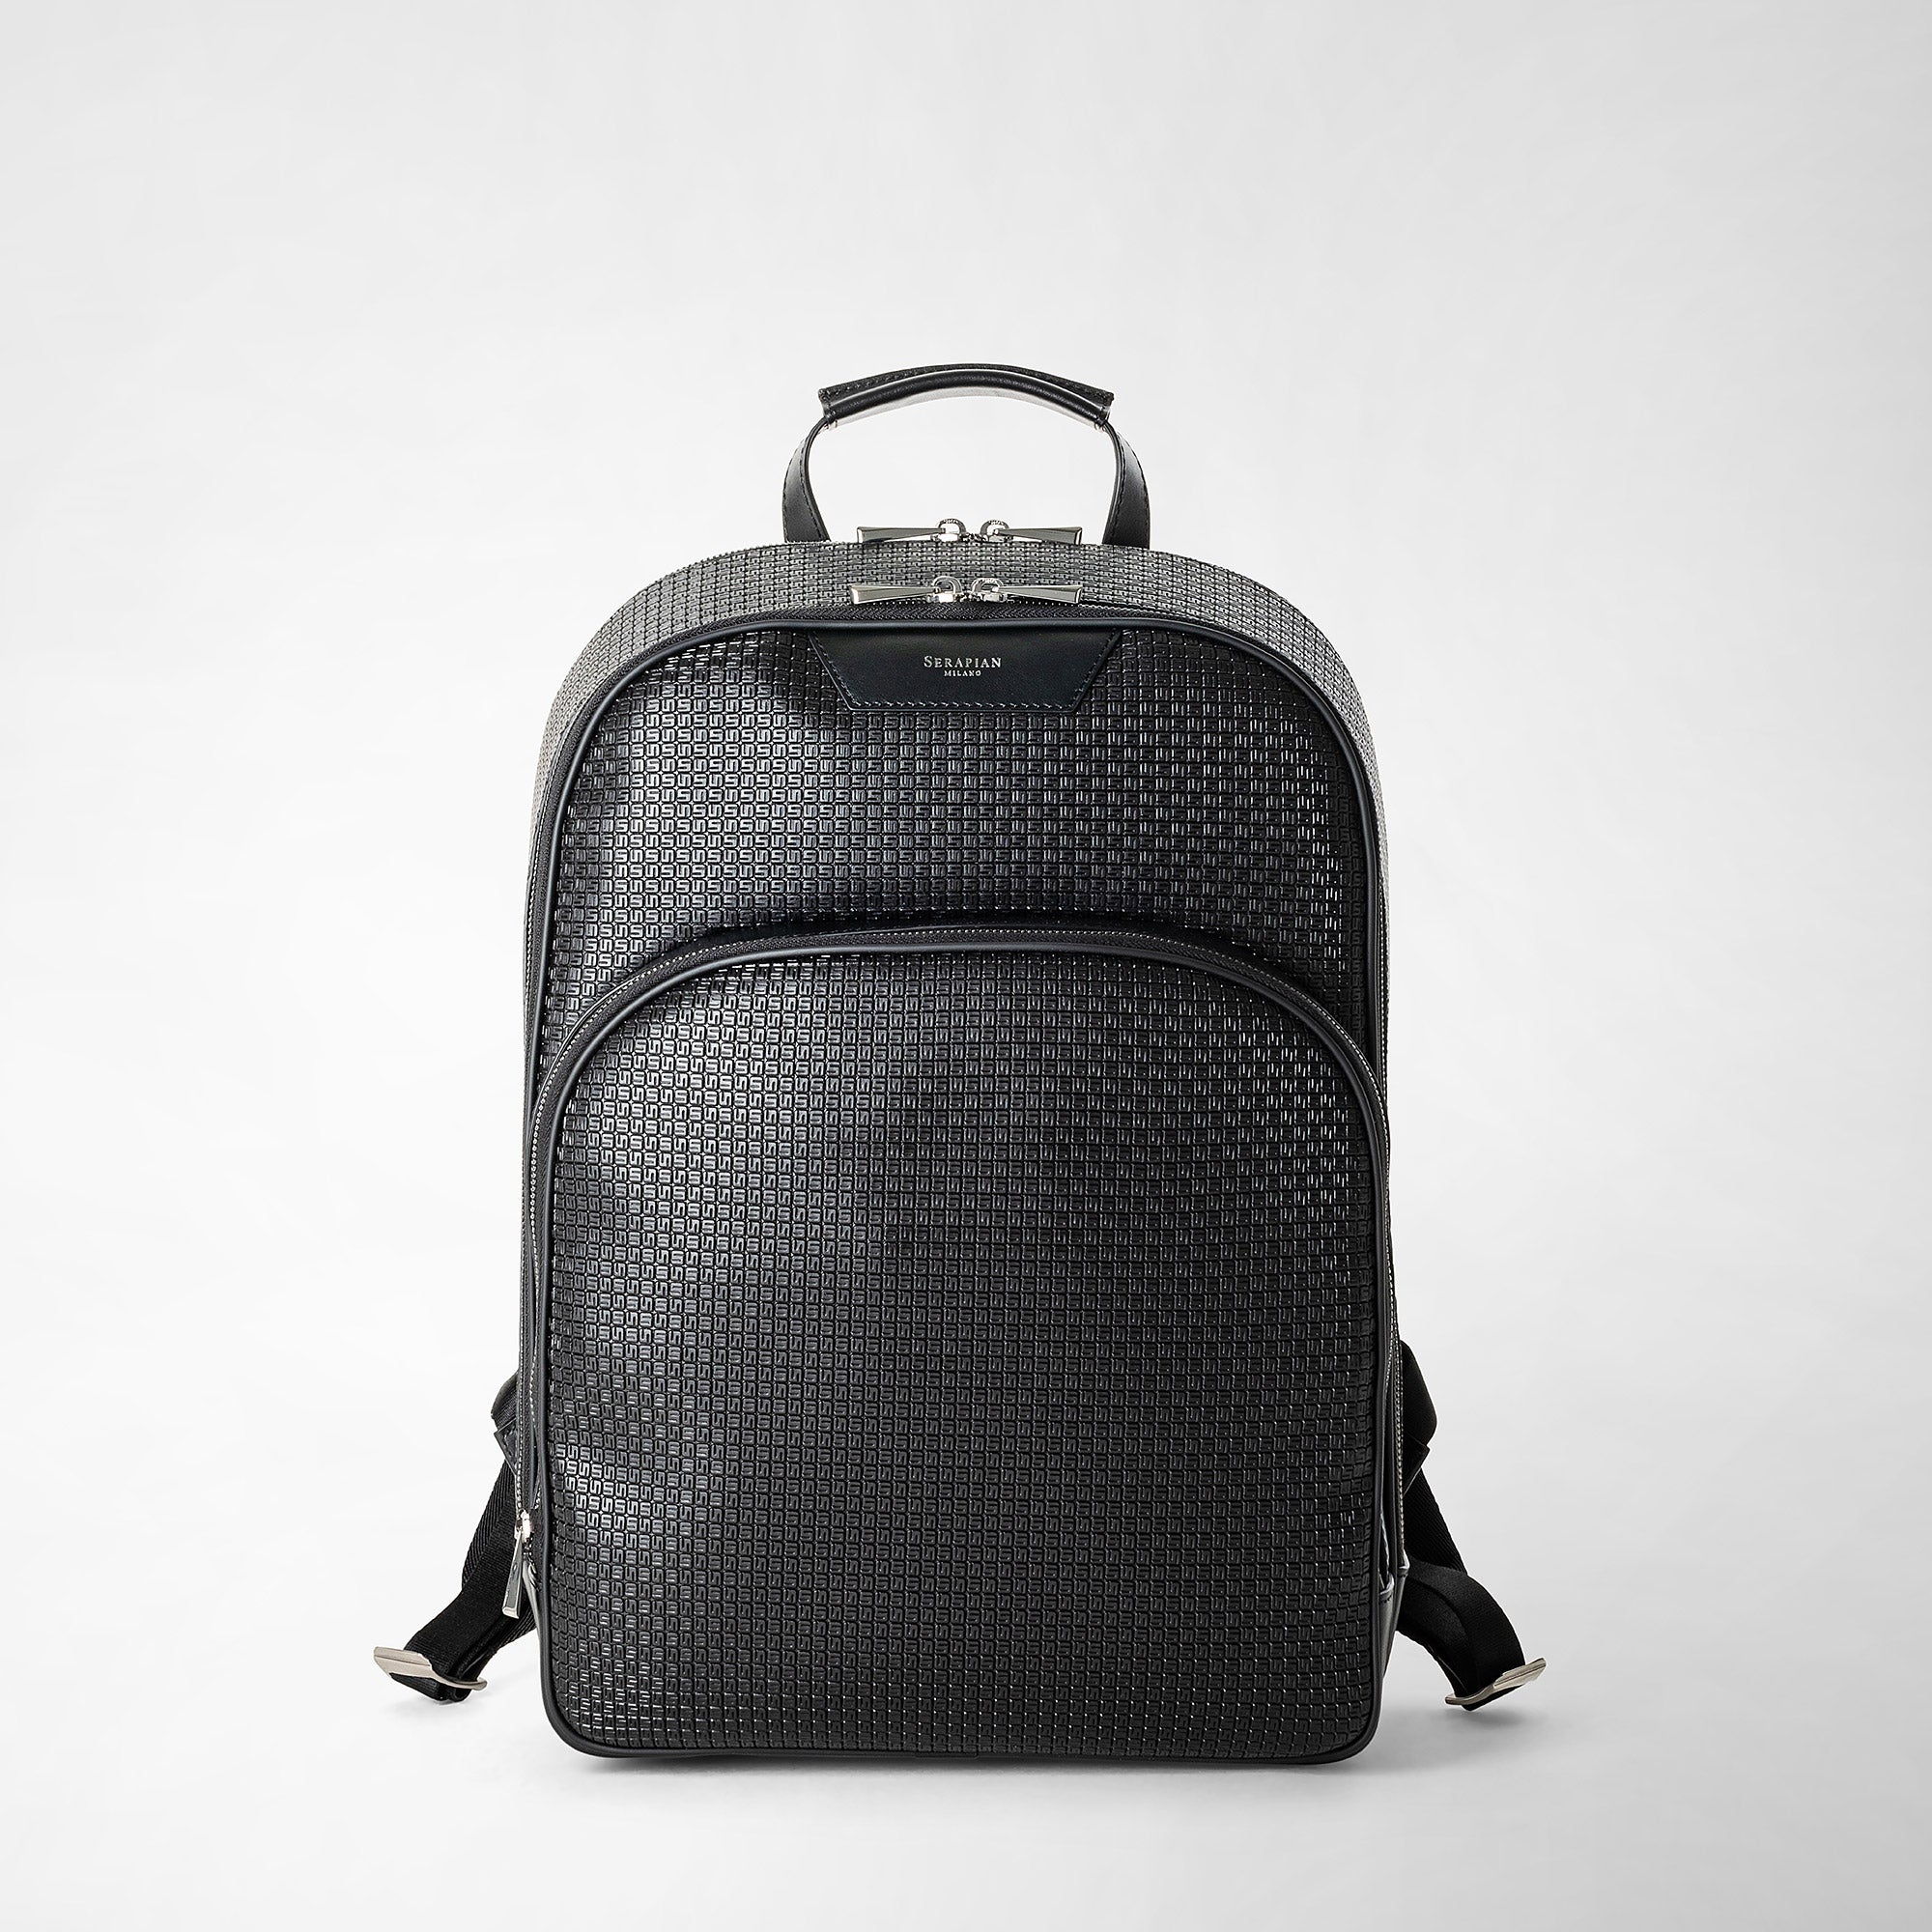 City backpack in stepan black eclipse and black – Serapian 